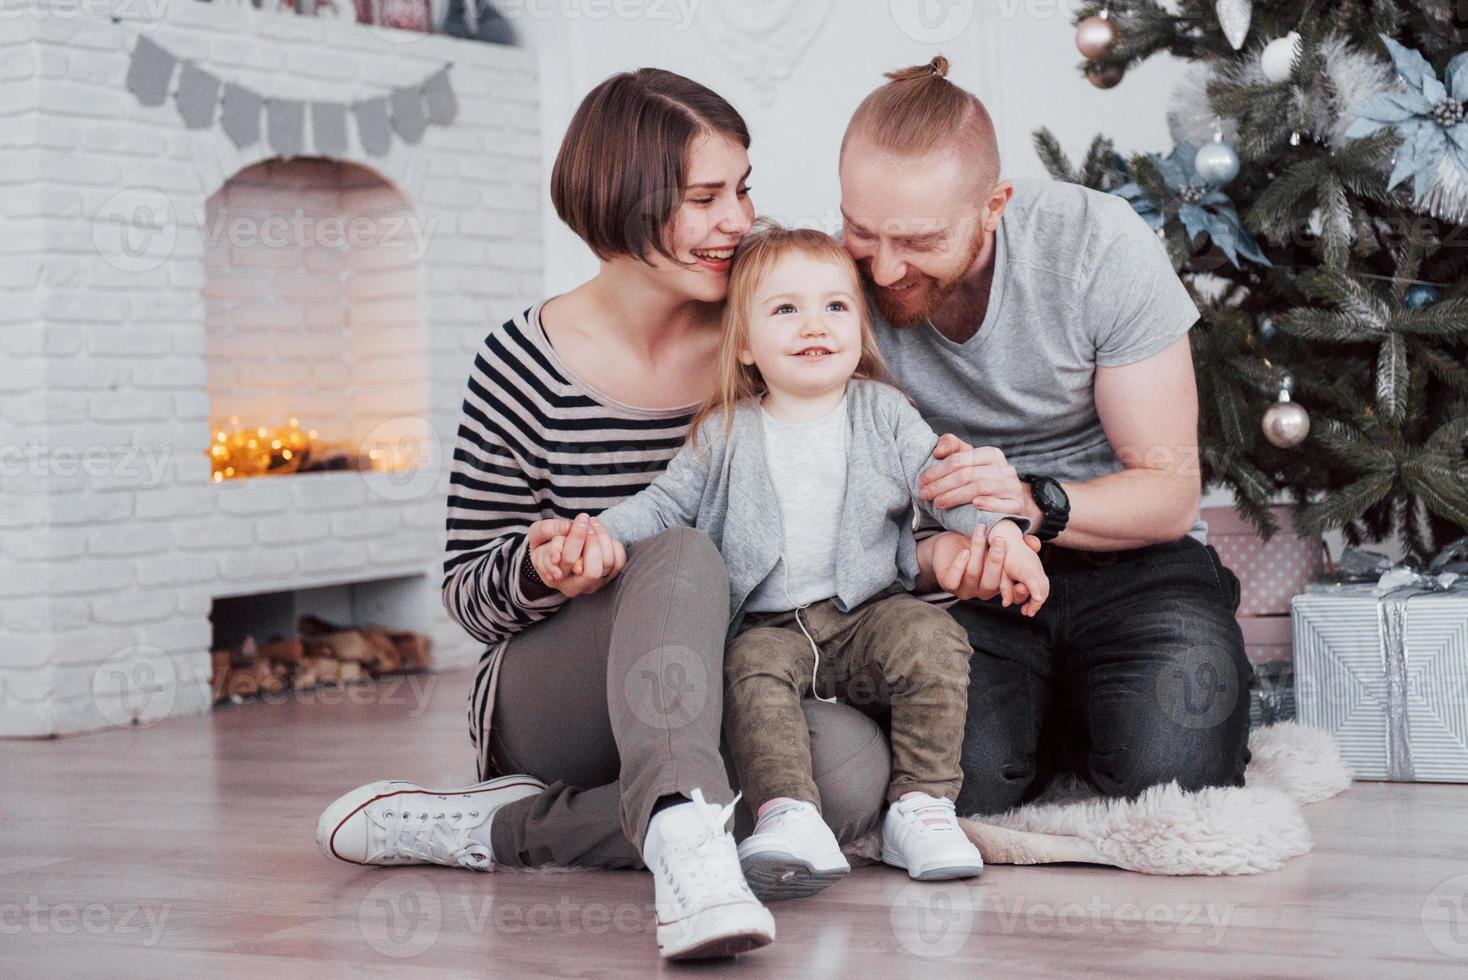 Happy family at christmas in morning opening gifts together near the fir tree. The concept of family happiness and well-being photo